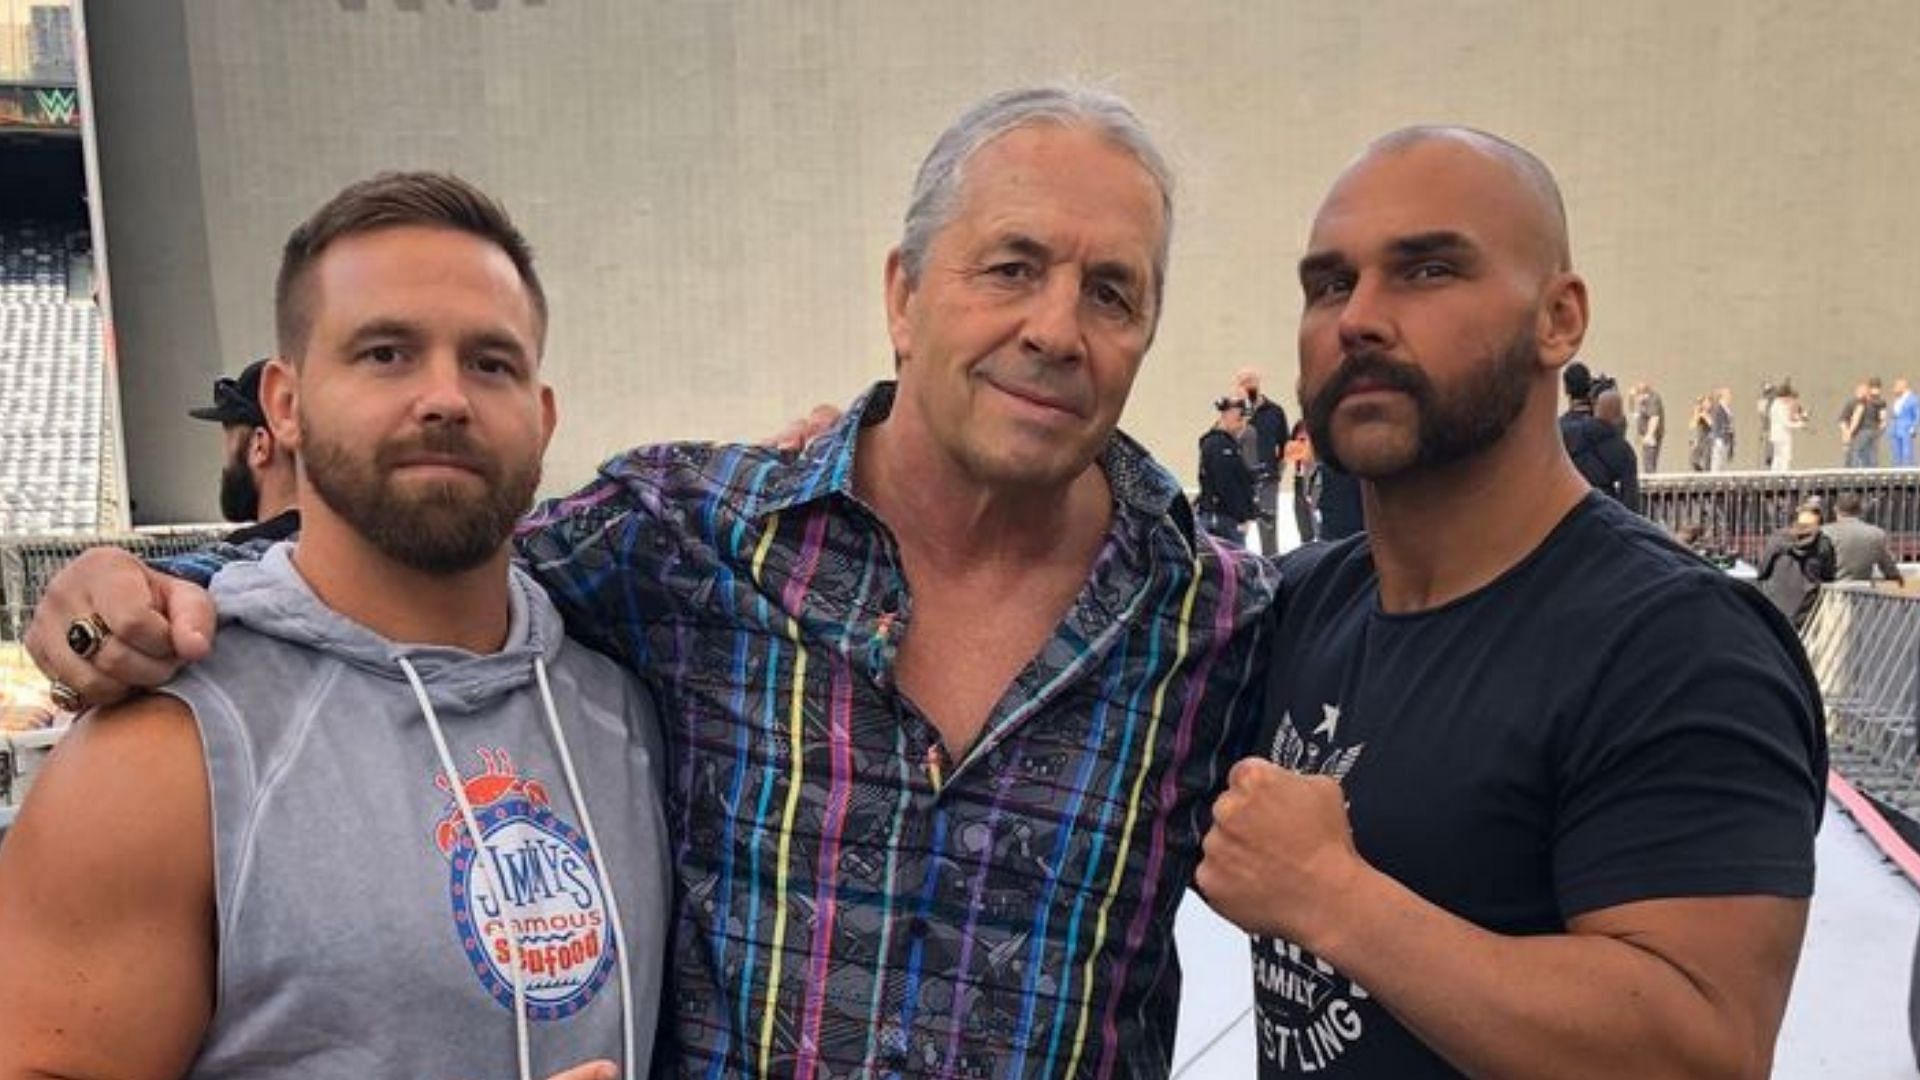 Bret Hart is the famed idol of the ROH tag champs